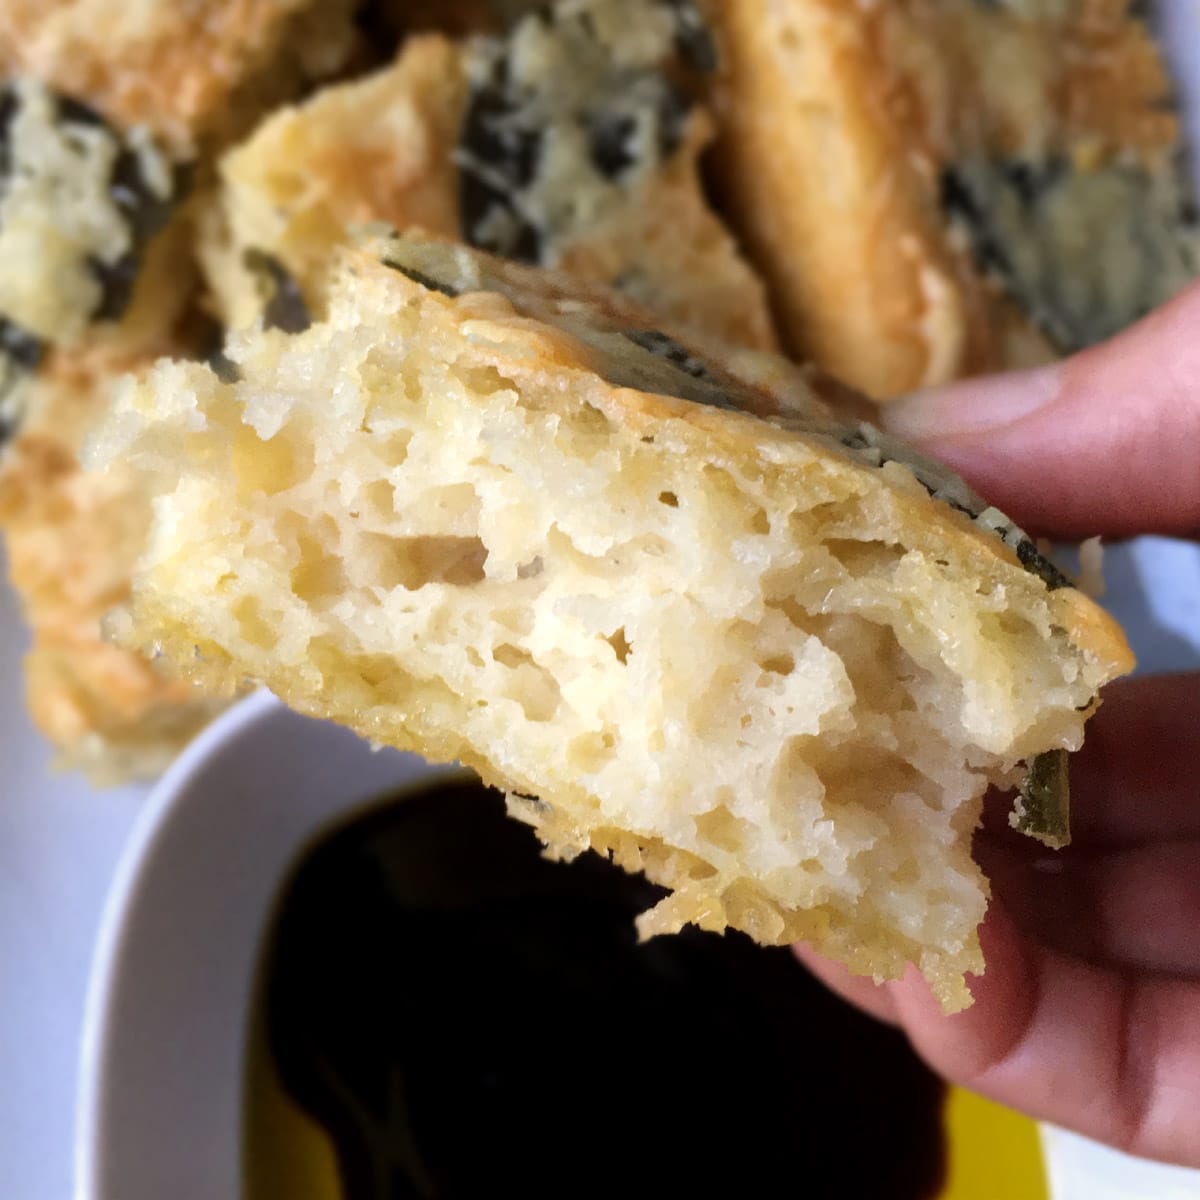 Close-up of the inside of a piece of parmesan sage focaccia bread being help by a hand over a bowl of oil and dark brown vinegar.